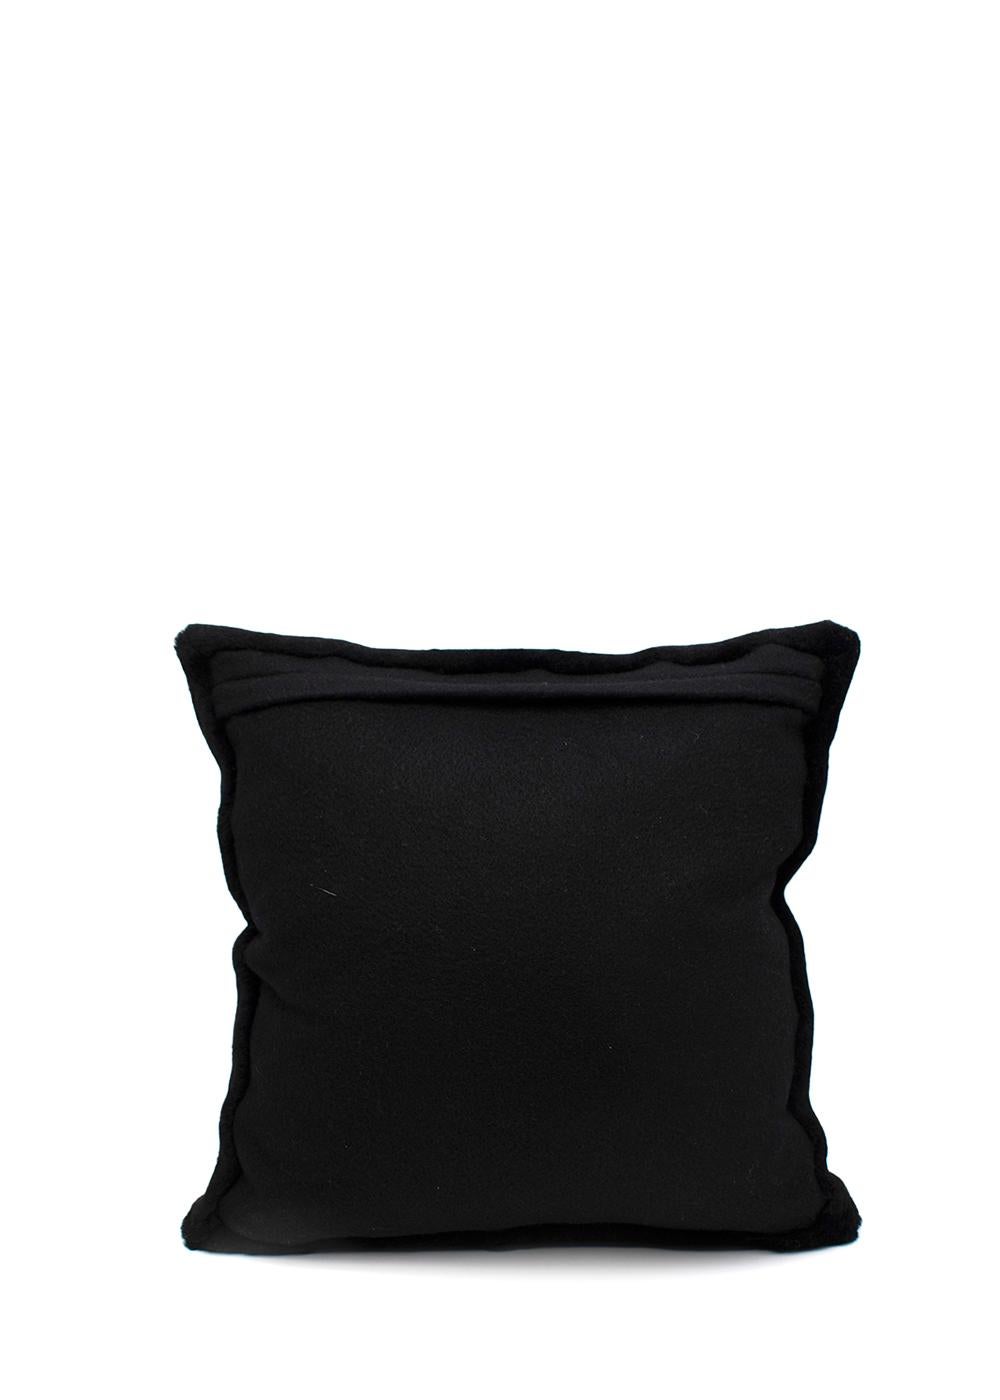 Chanel Grey & Black CC Shearling & Cashmere Pillow

- Shearling front with CC logo in grey and black hues
- Soft cashmere felt back
- Concealed top zip and removable cushion pad

Materials
100% Sheep Shearling
100% Cashmere
Pillow
Outer 100% Cotton